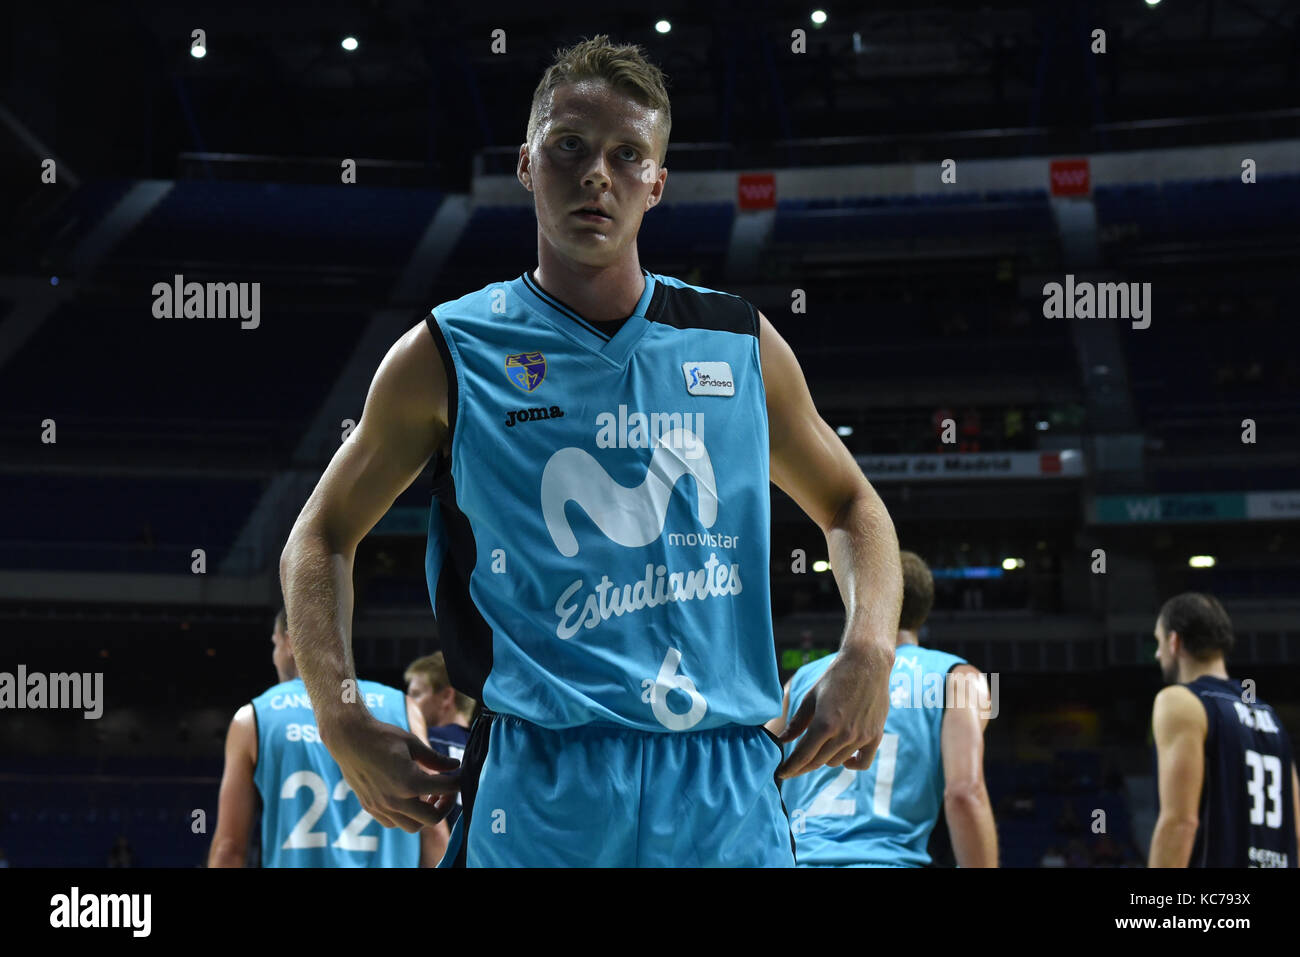 Madrid, Spain. 02nd Oct, 2017. Ludvig Hakanson, #6 of Estudiantes pictured during the second game of Qualification Round for the basketball Champions league between Estudiantes and Donar Groningen. Credit: Jorge Sanz/Pacific Press/Alamy Live News Stock Photo